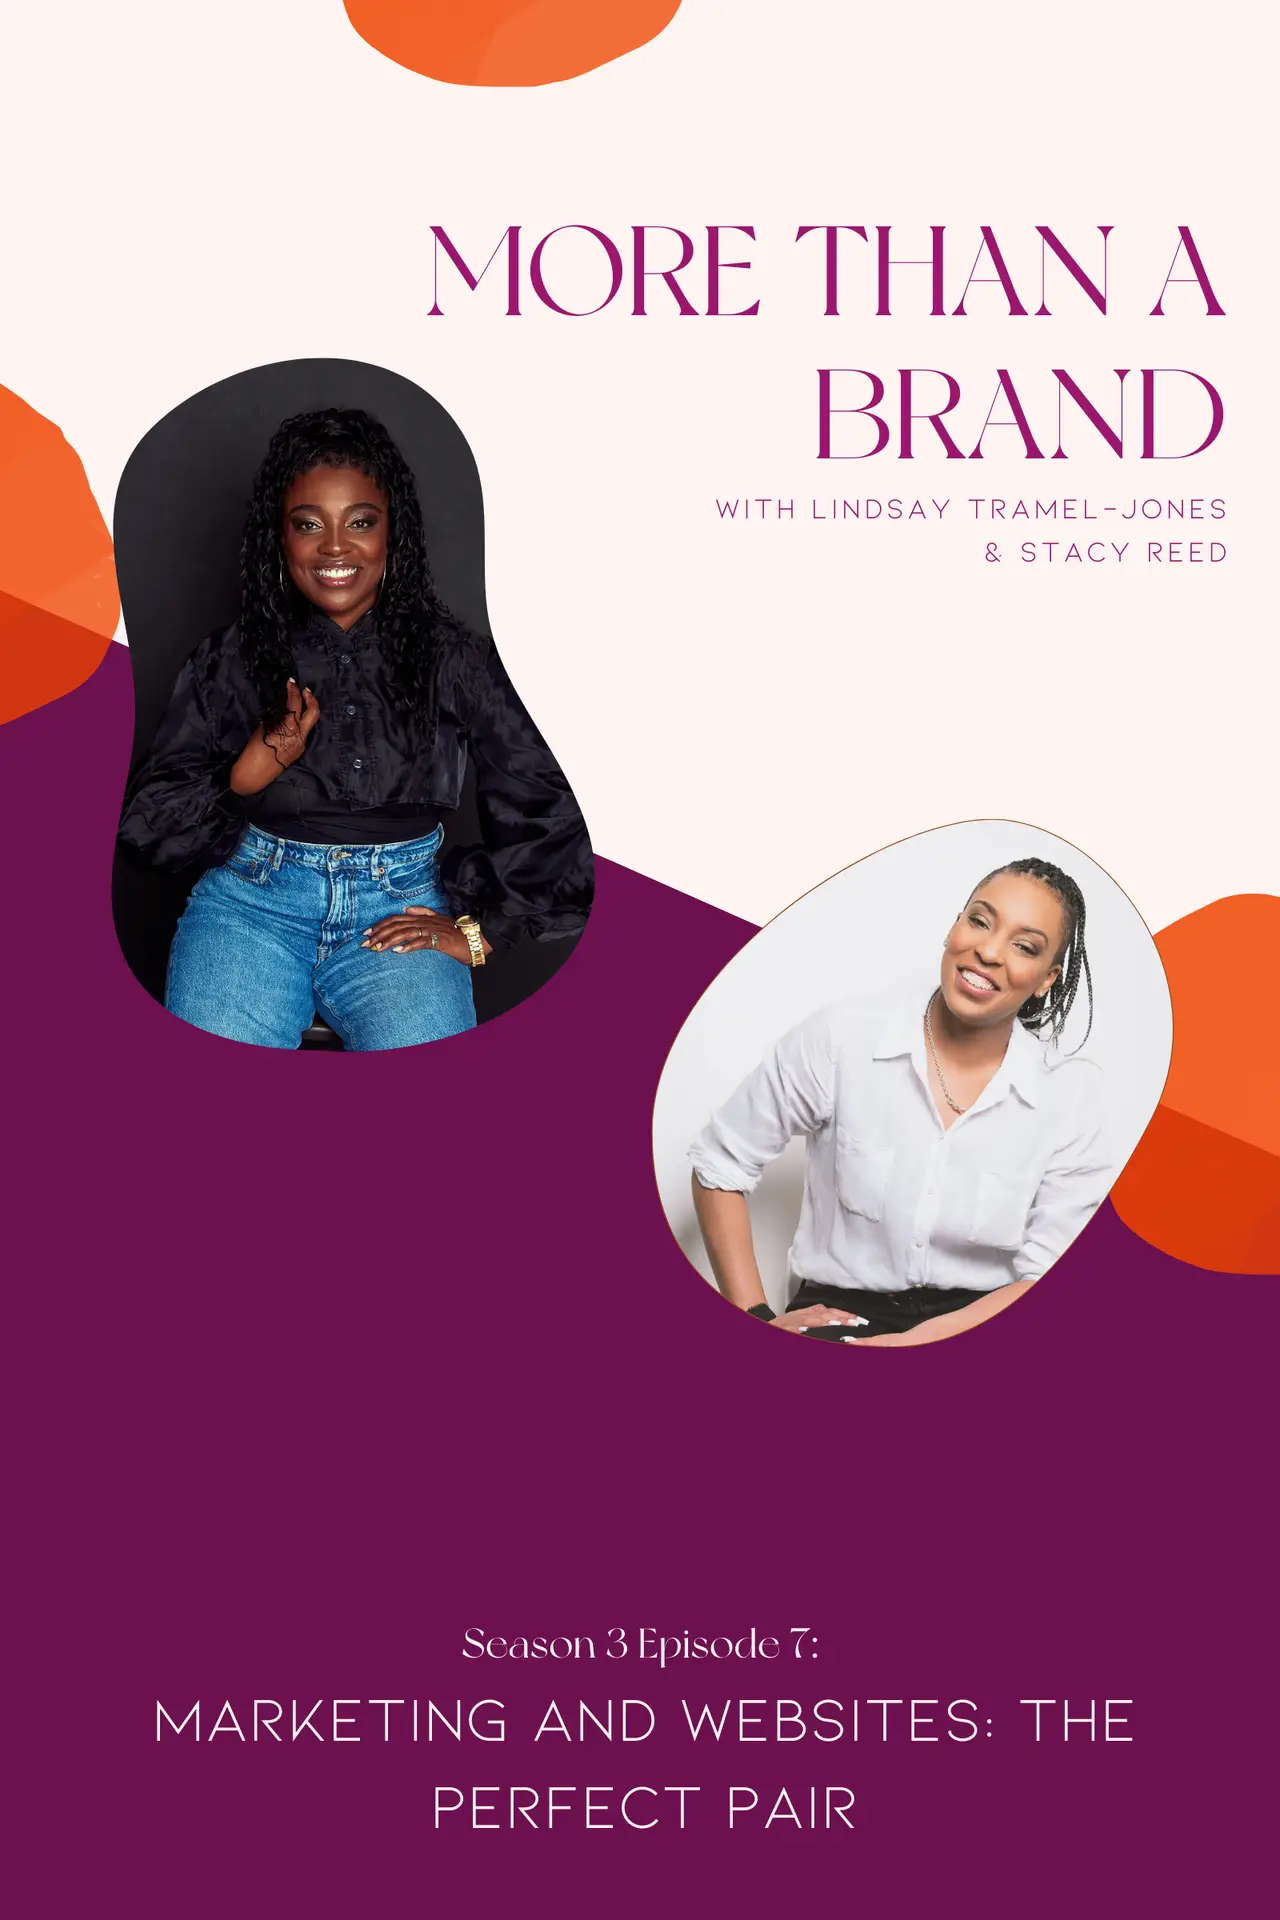 Podcast cover with two black females